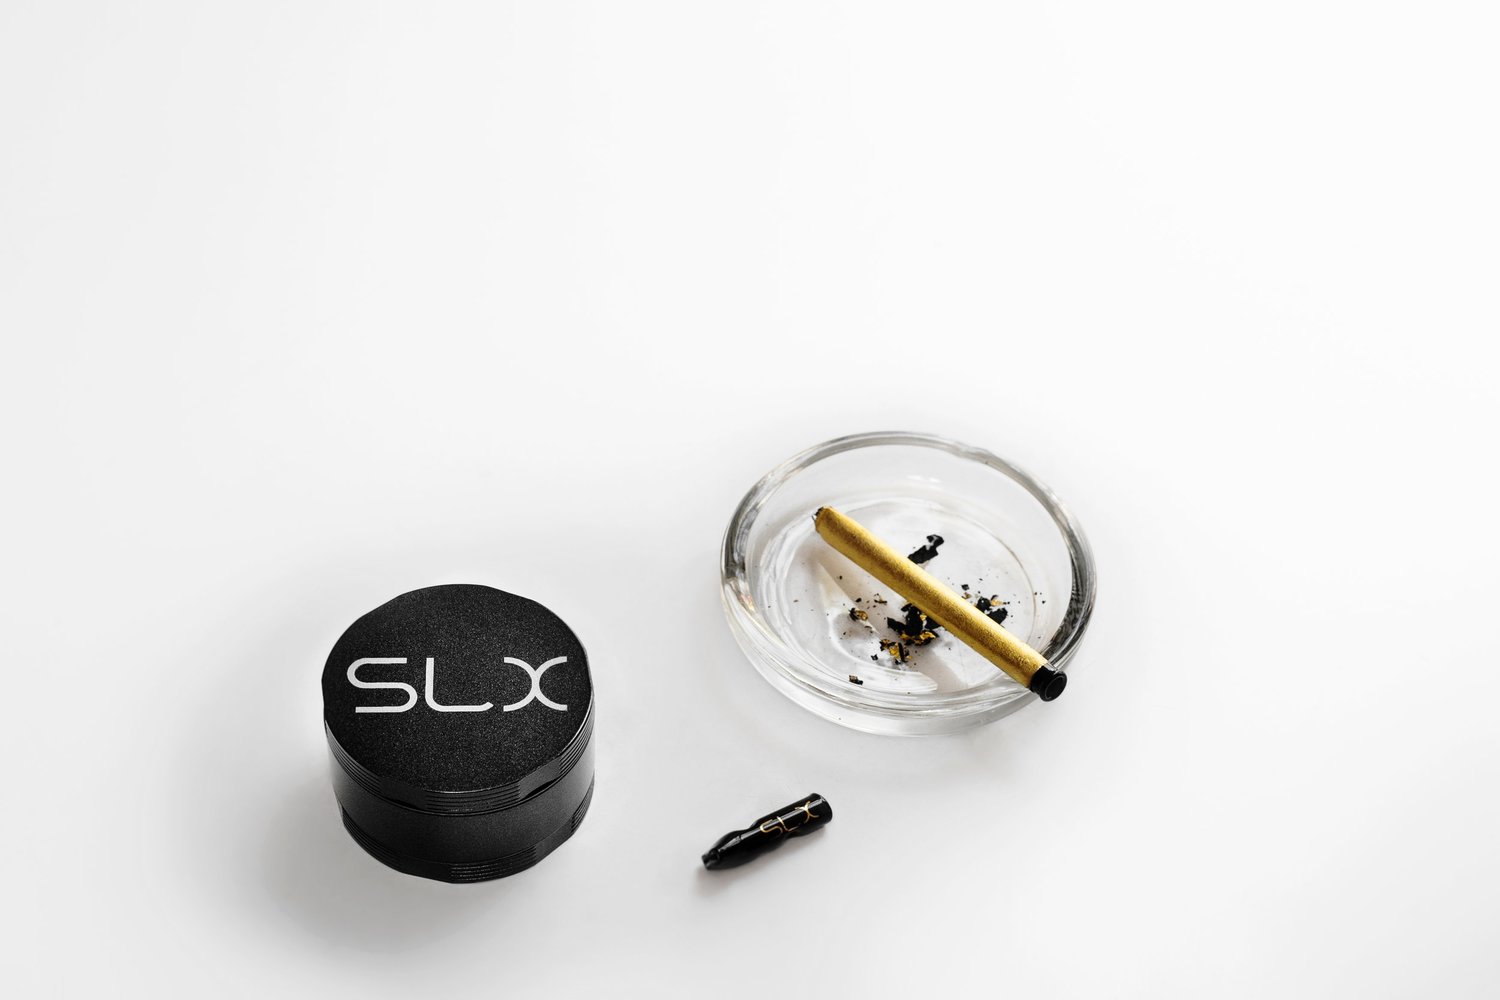 Large Herb Grinder by SLX, Nonstick, Easy To Use